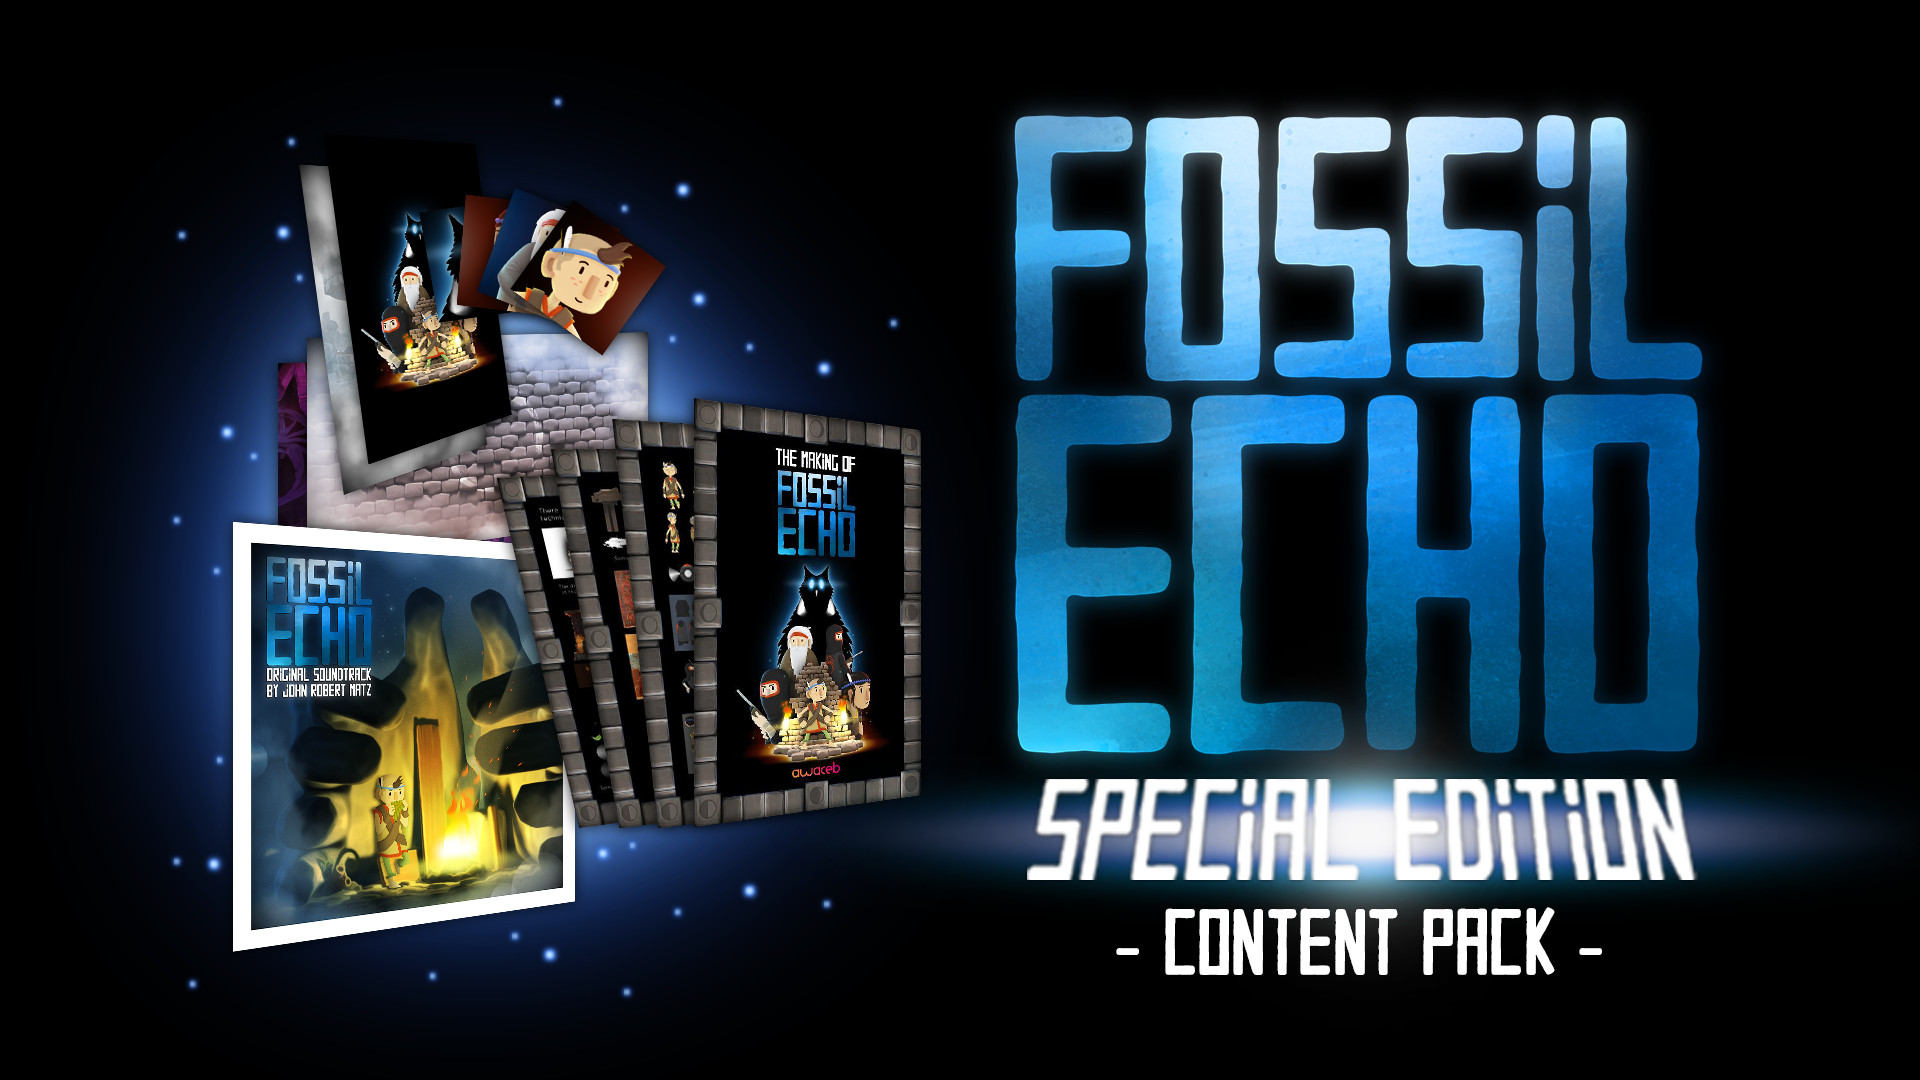 Fossil Echo - Special Edition Content Pack Featured Screenshot #1